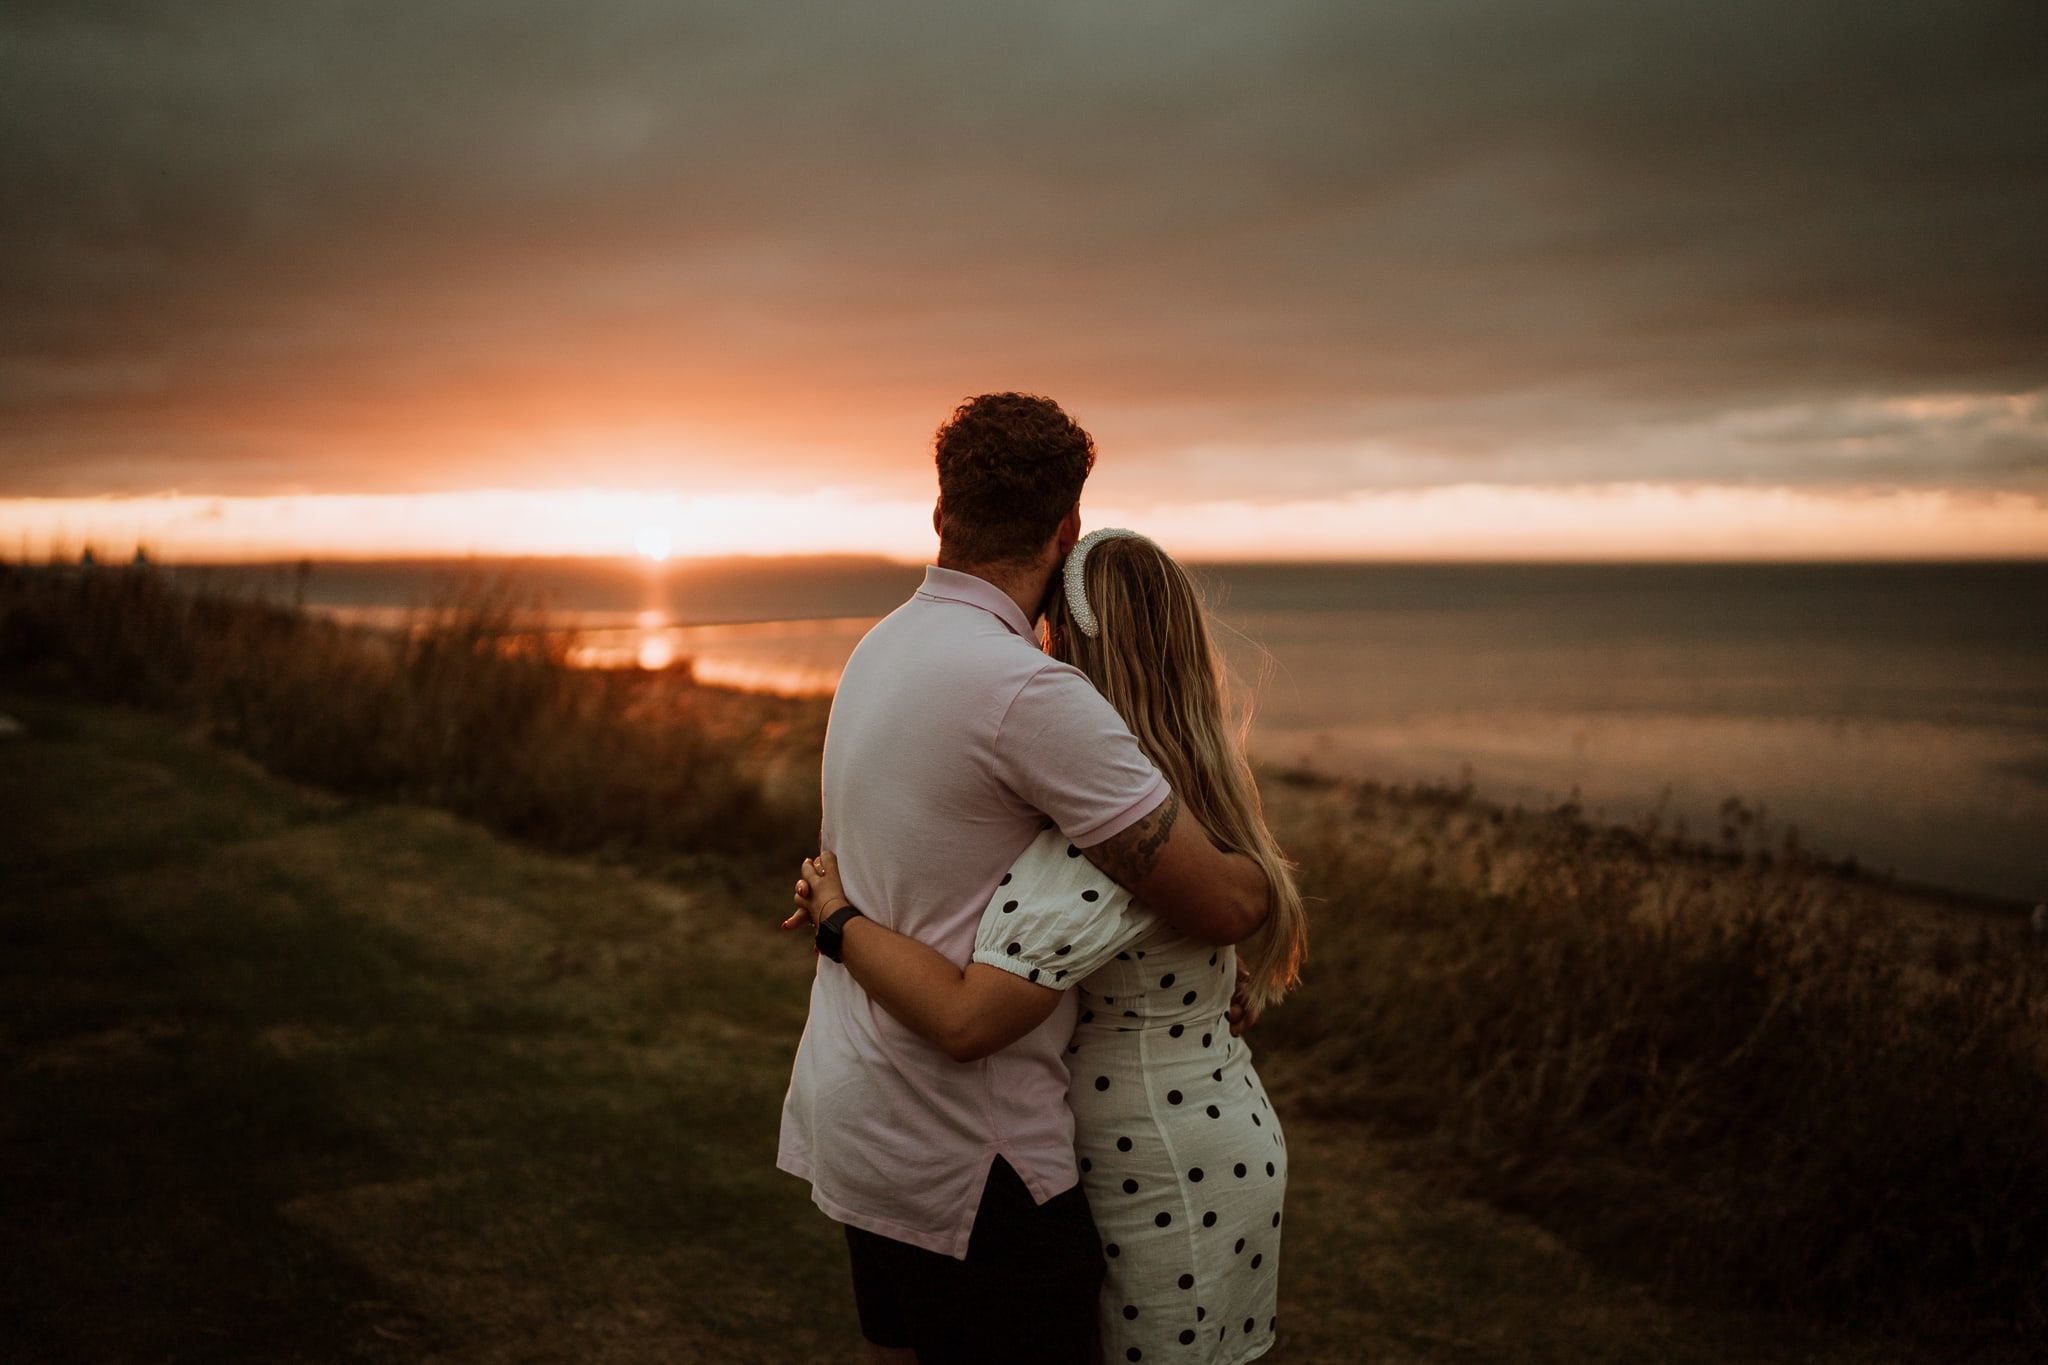 Natural Engagement Photoshoot Ideas During Golden Hour